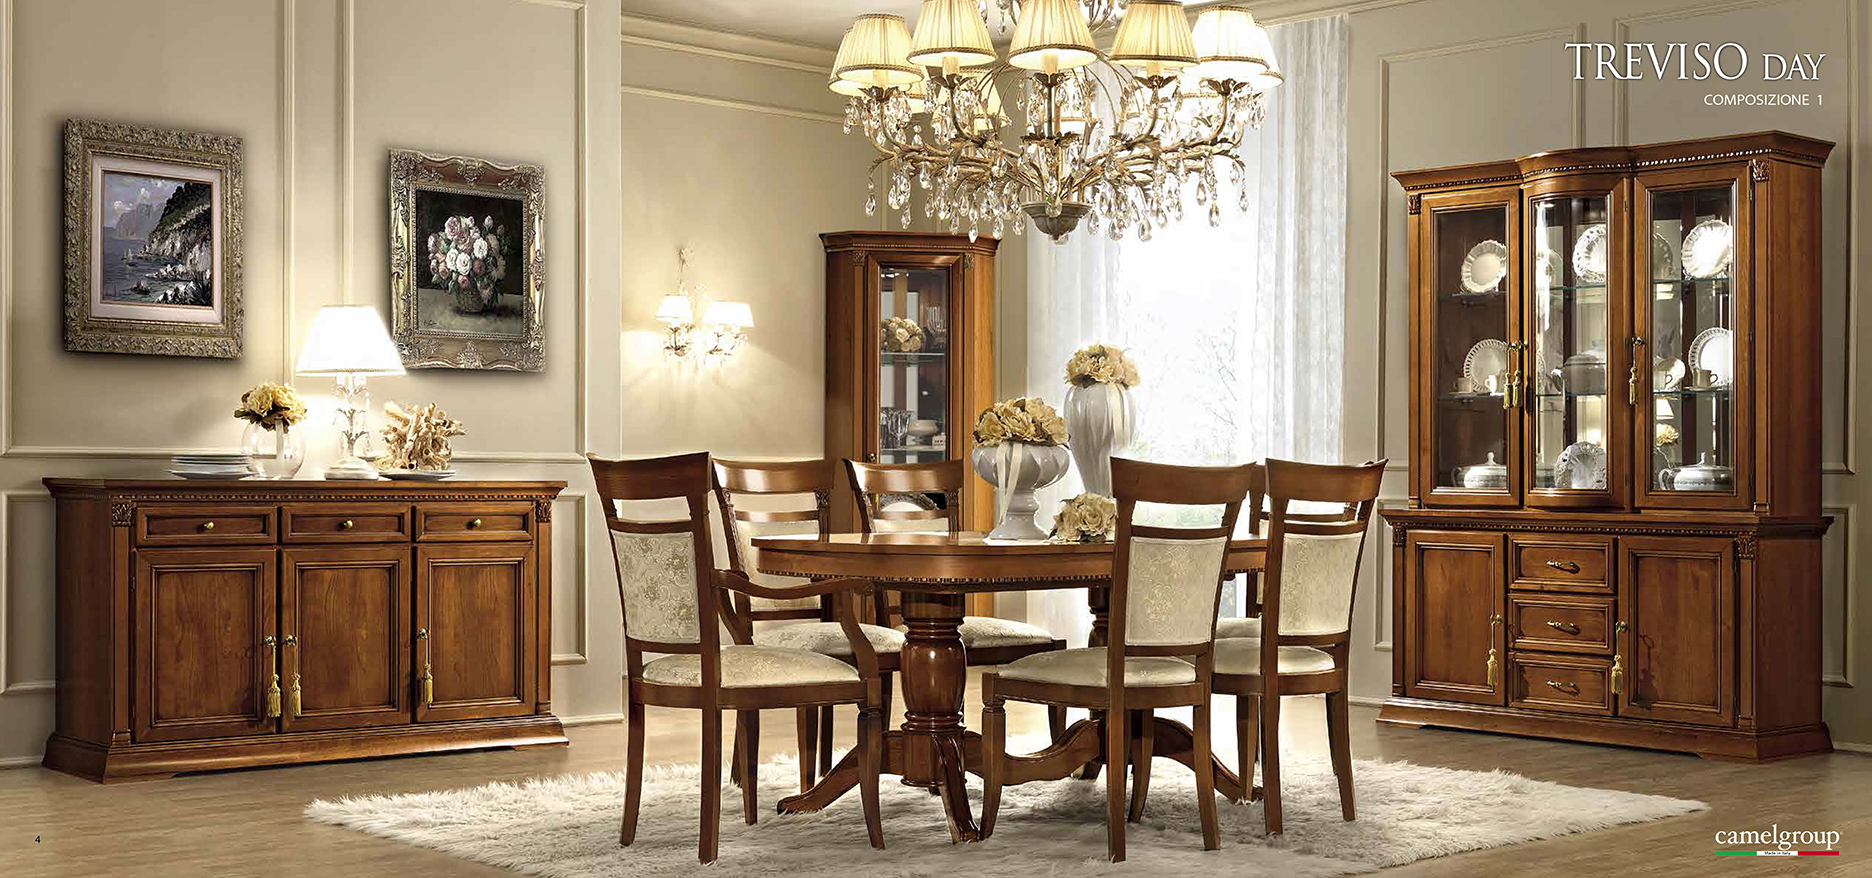 Dining Room Furniture Classic Dining Room Sets Treviso Cherry Day